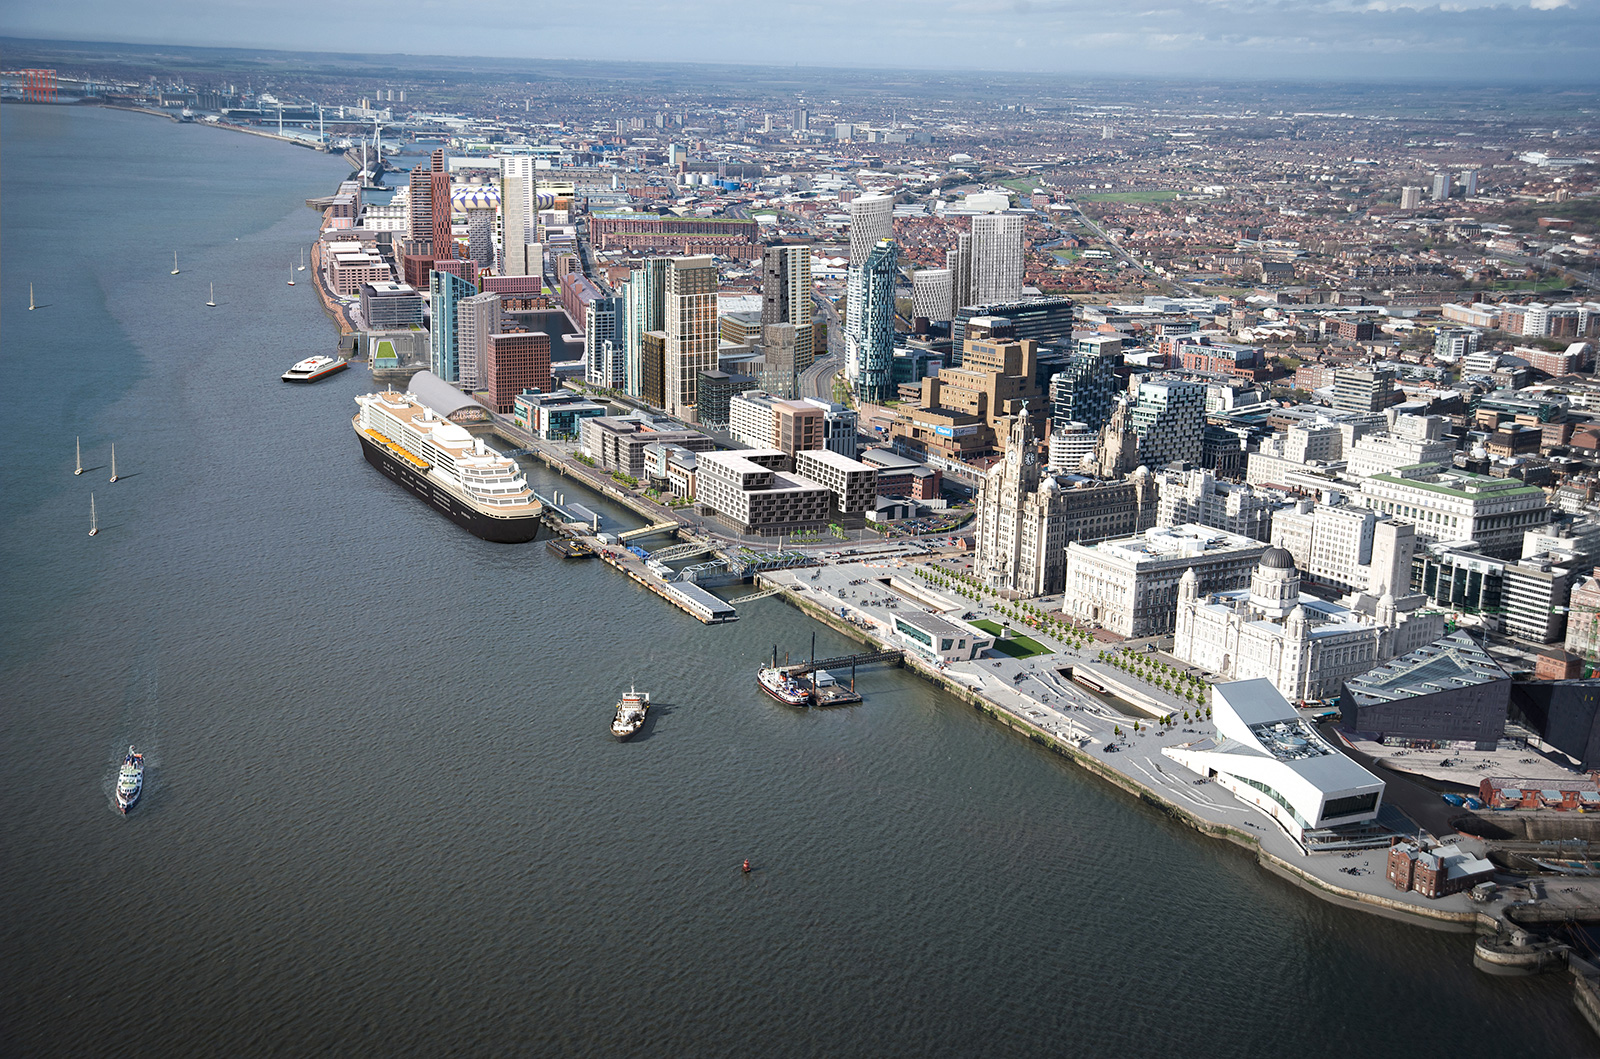 A rendering of how the waterfront might look after the planned Liverpool Waters redevelopment